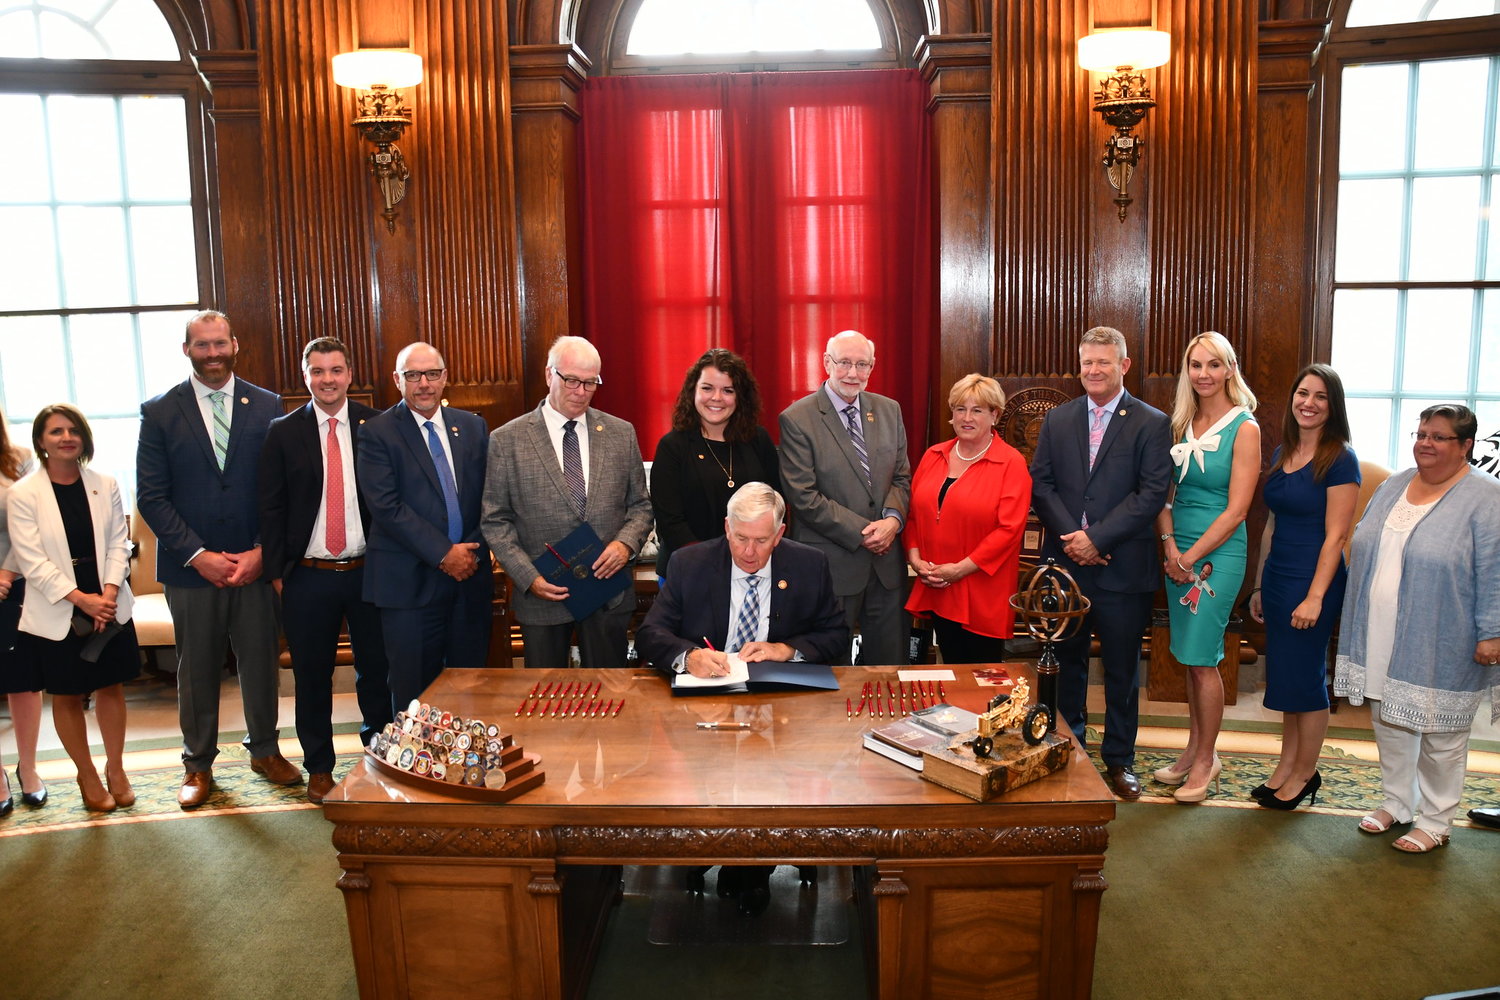 Gov. Mike Parson signs legislation supported by Rep. Crystal Quade, second from right.